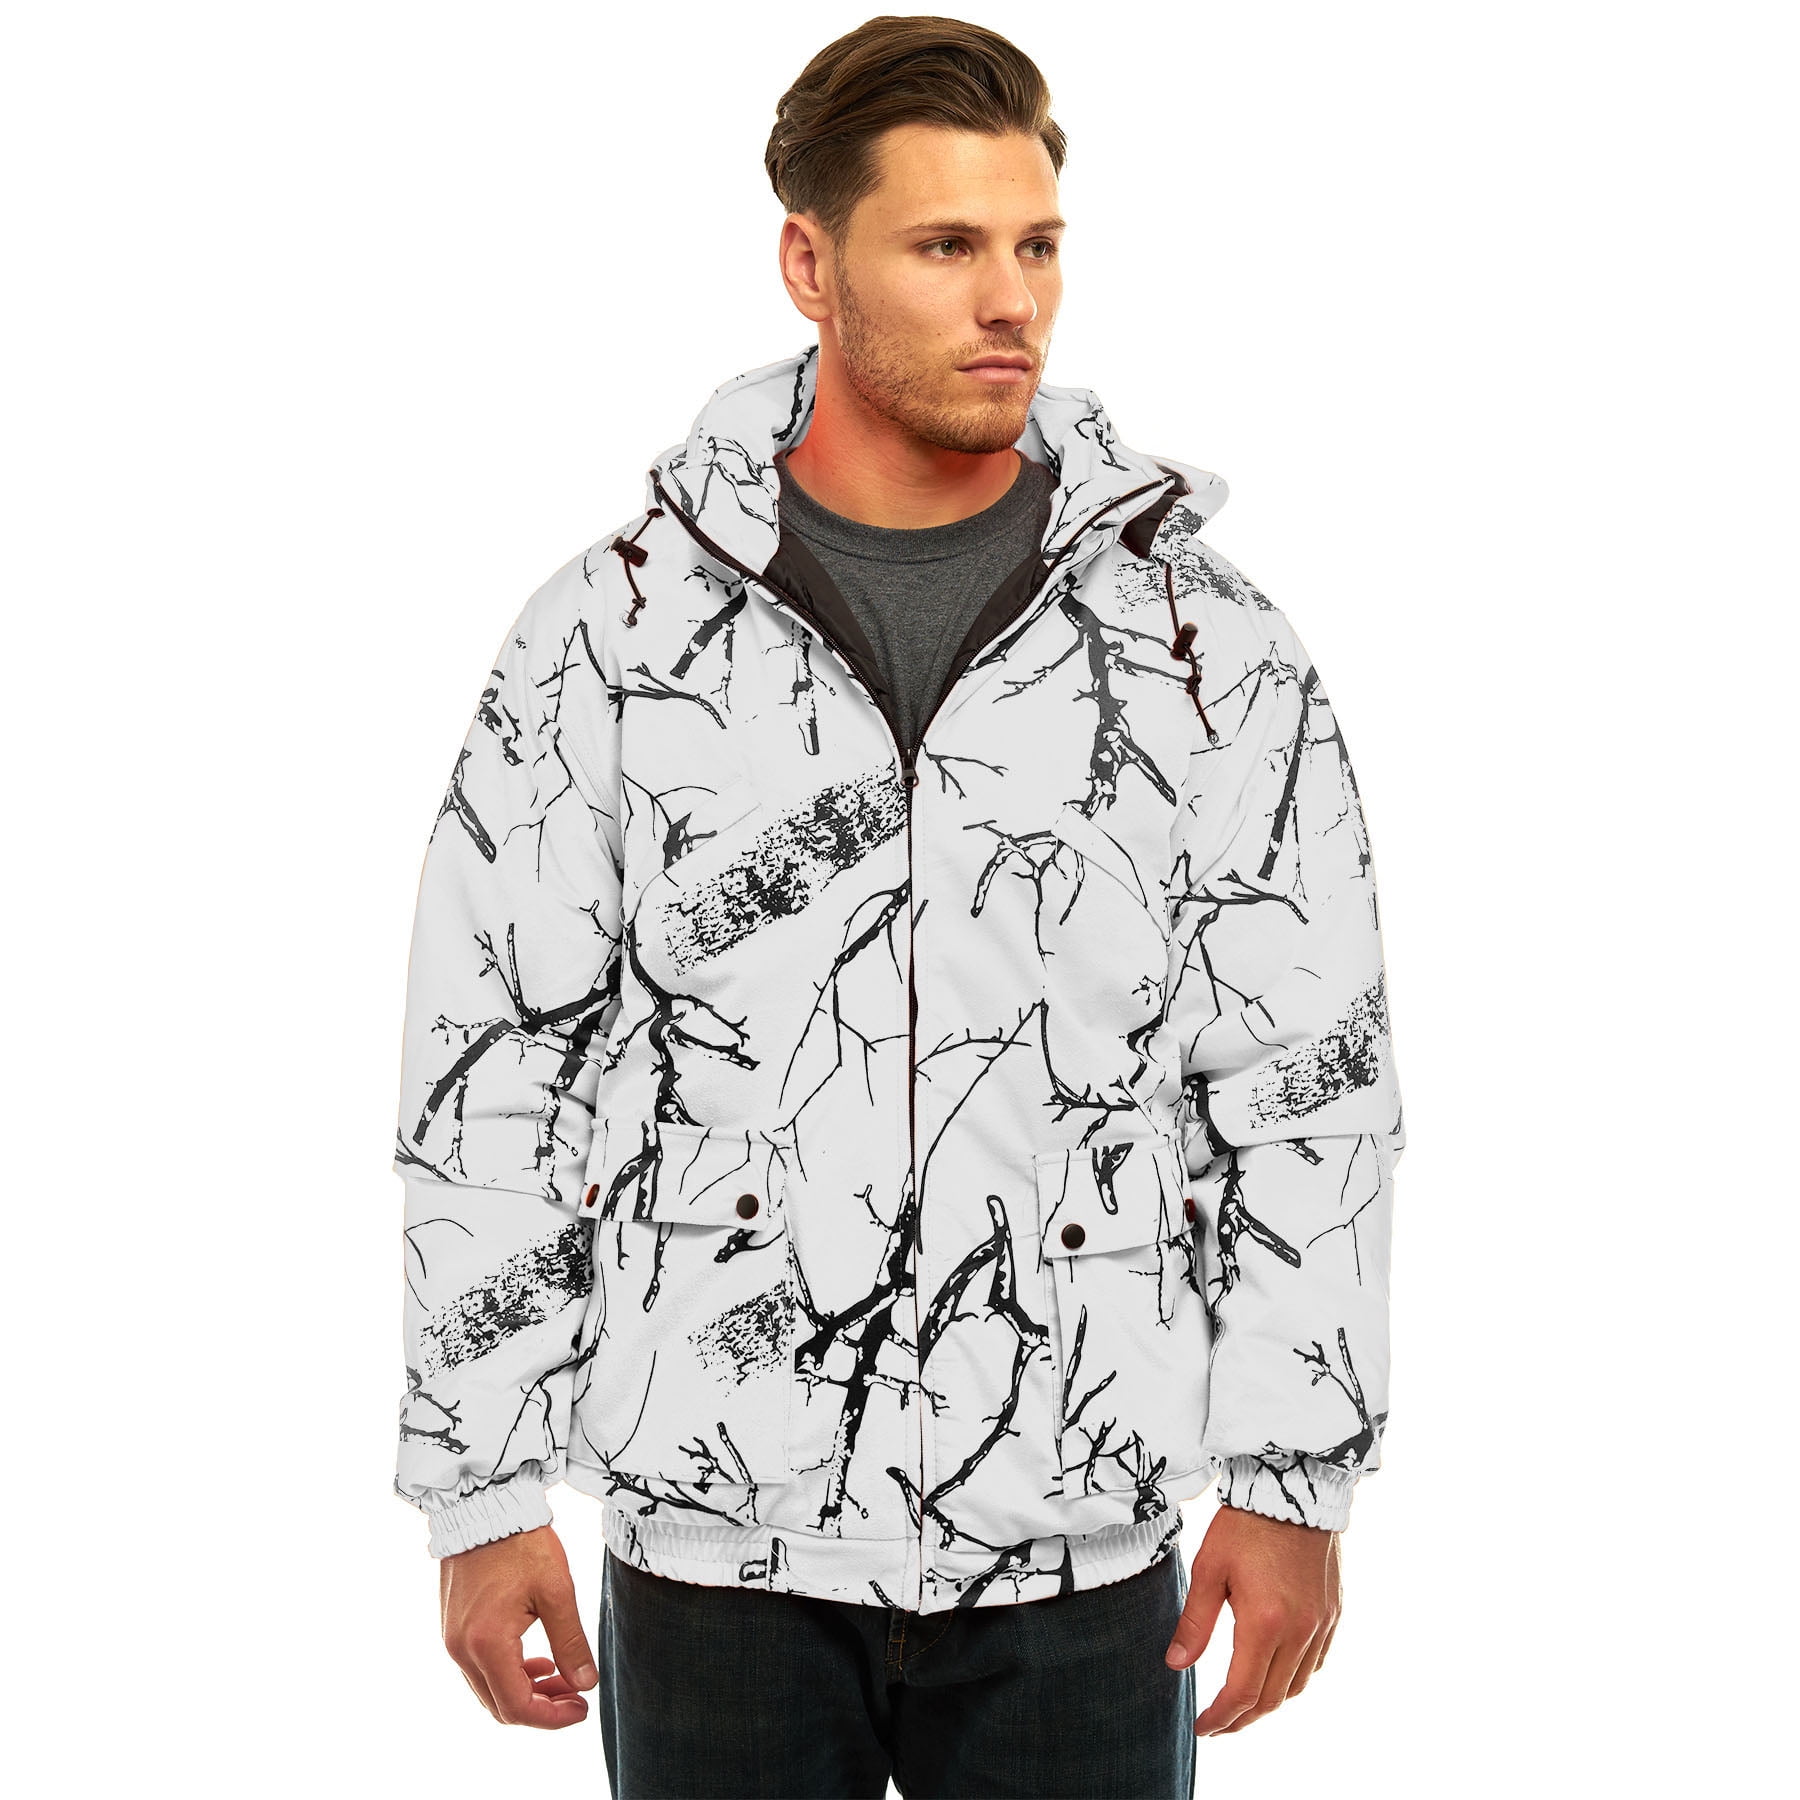 TRAILCREST MEN'S INSULATED AND WATERPROOF SNOW CAMO TANKER JACKET (M)